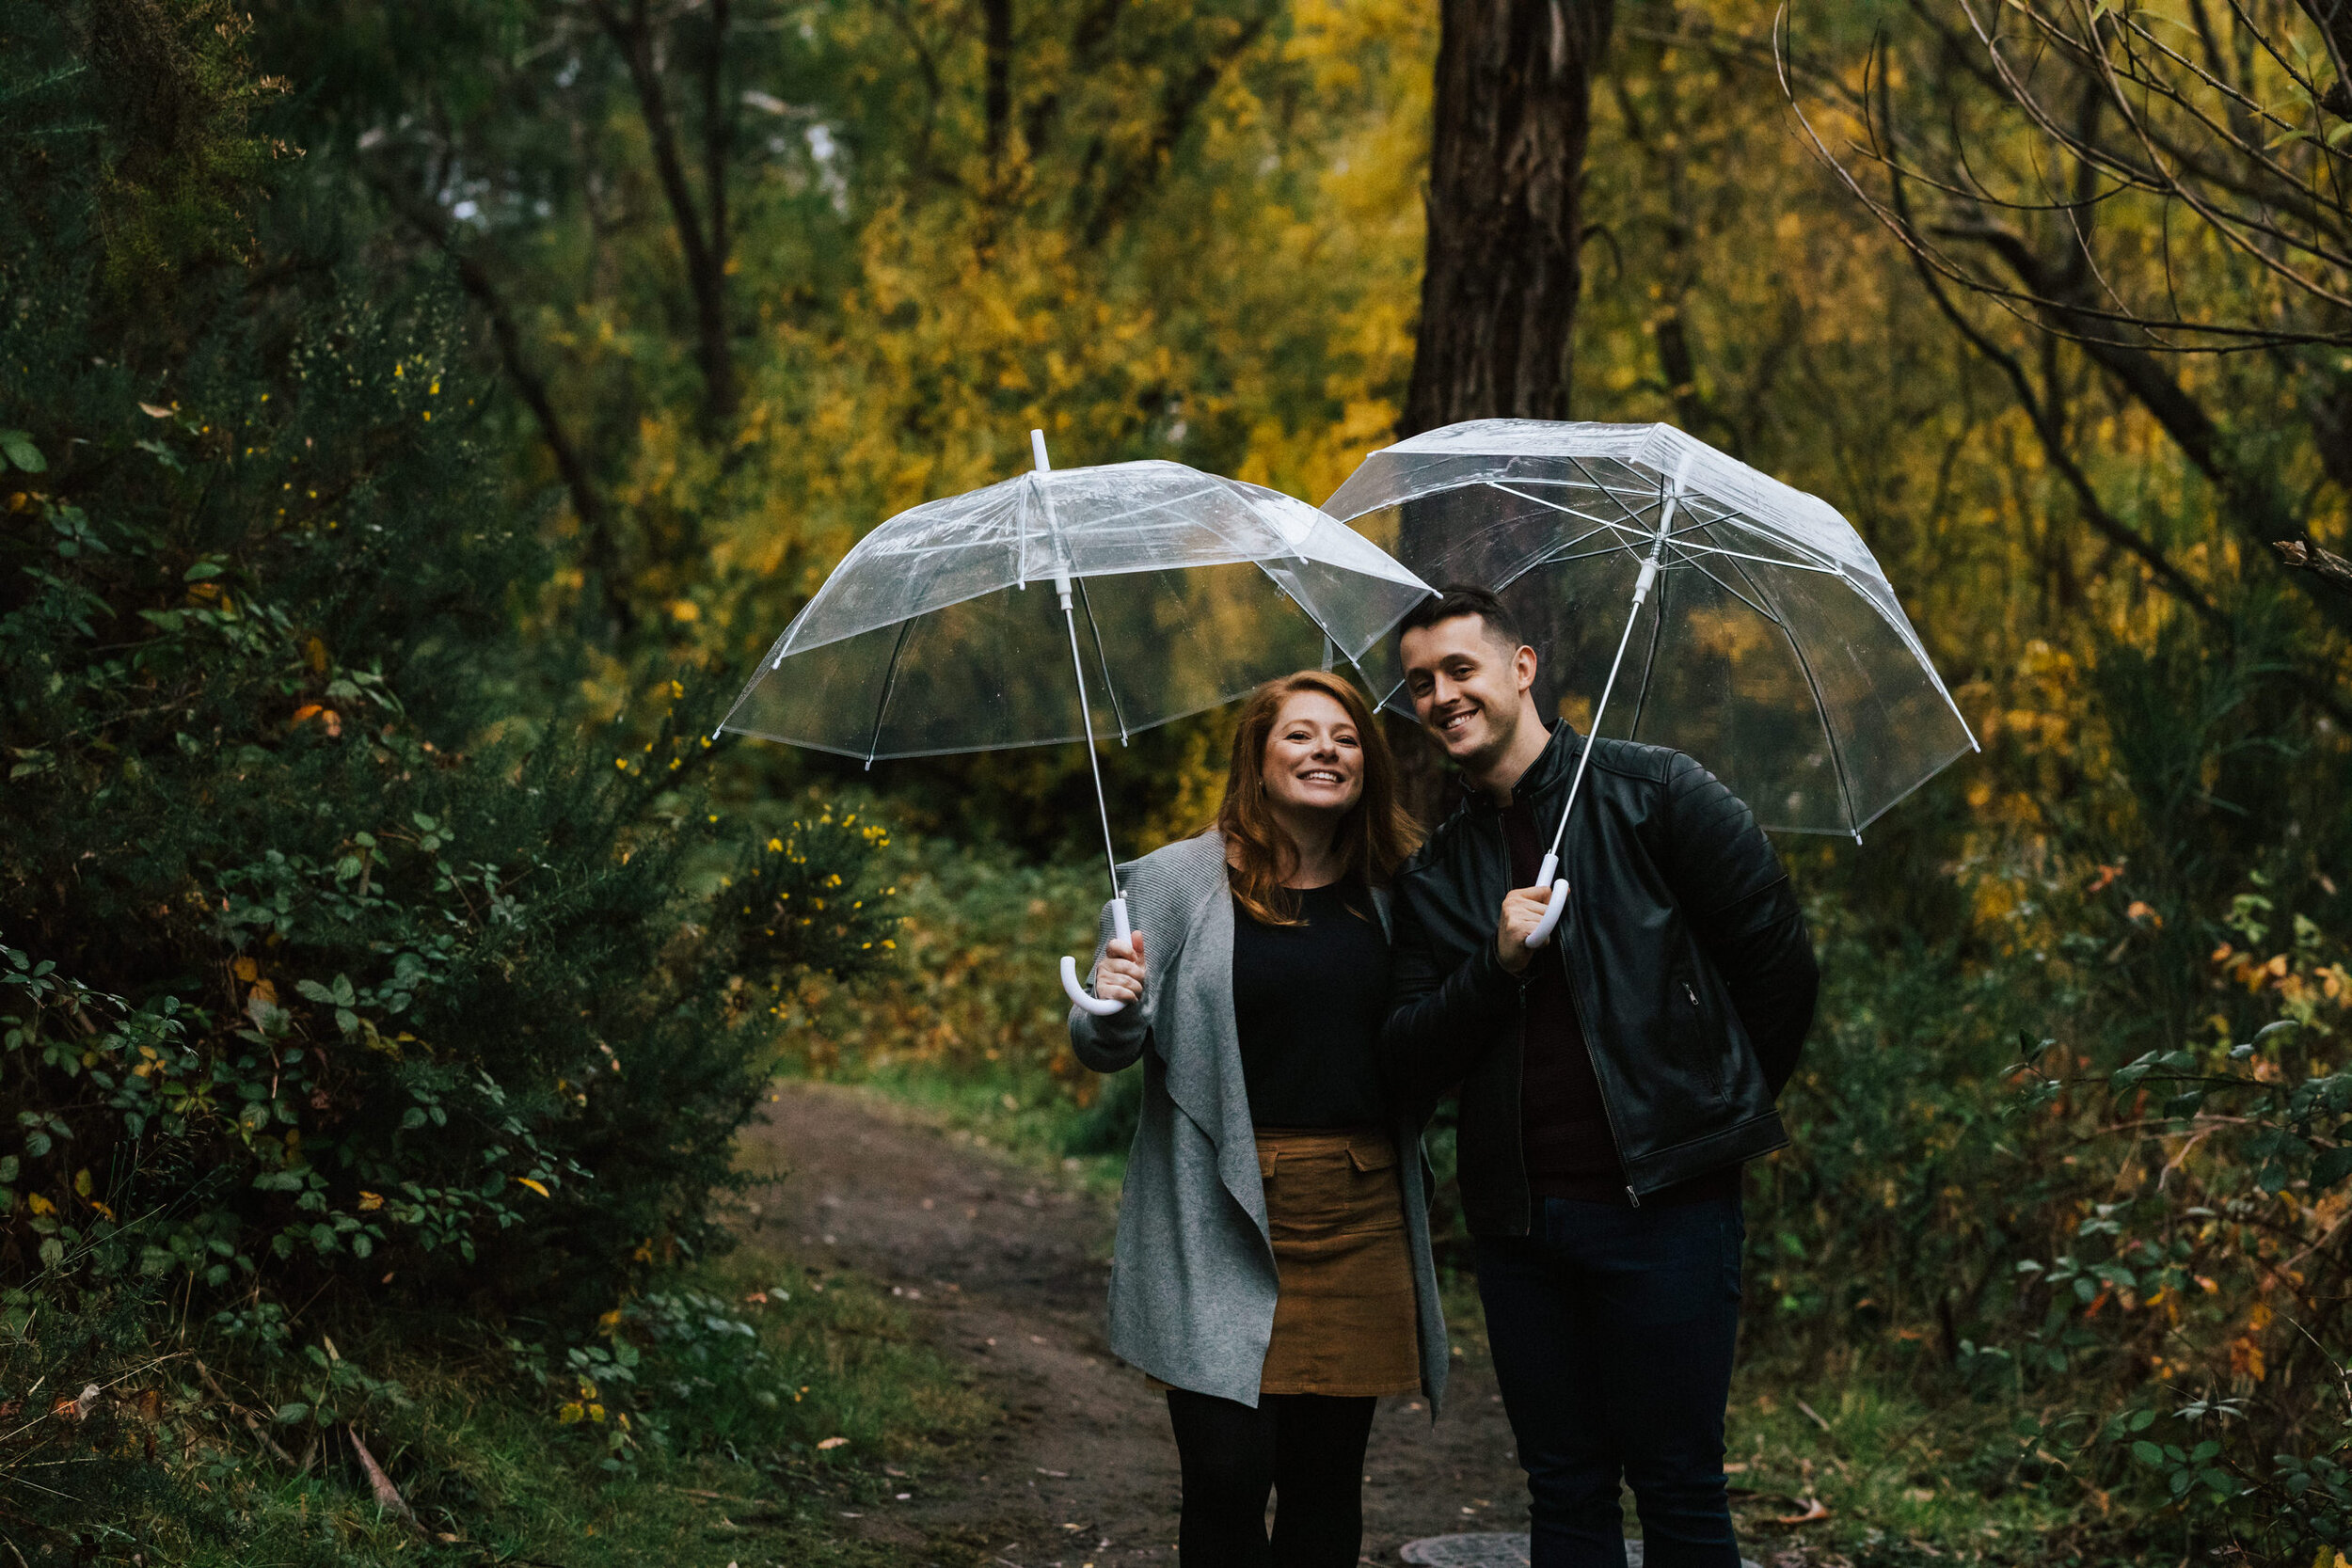 Wintery Autumn Adelaide Hills Engagement Session 19.JPG